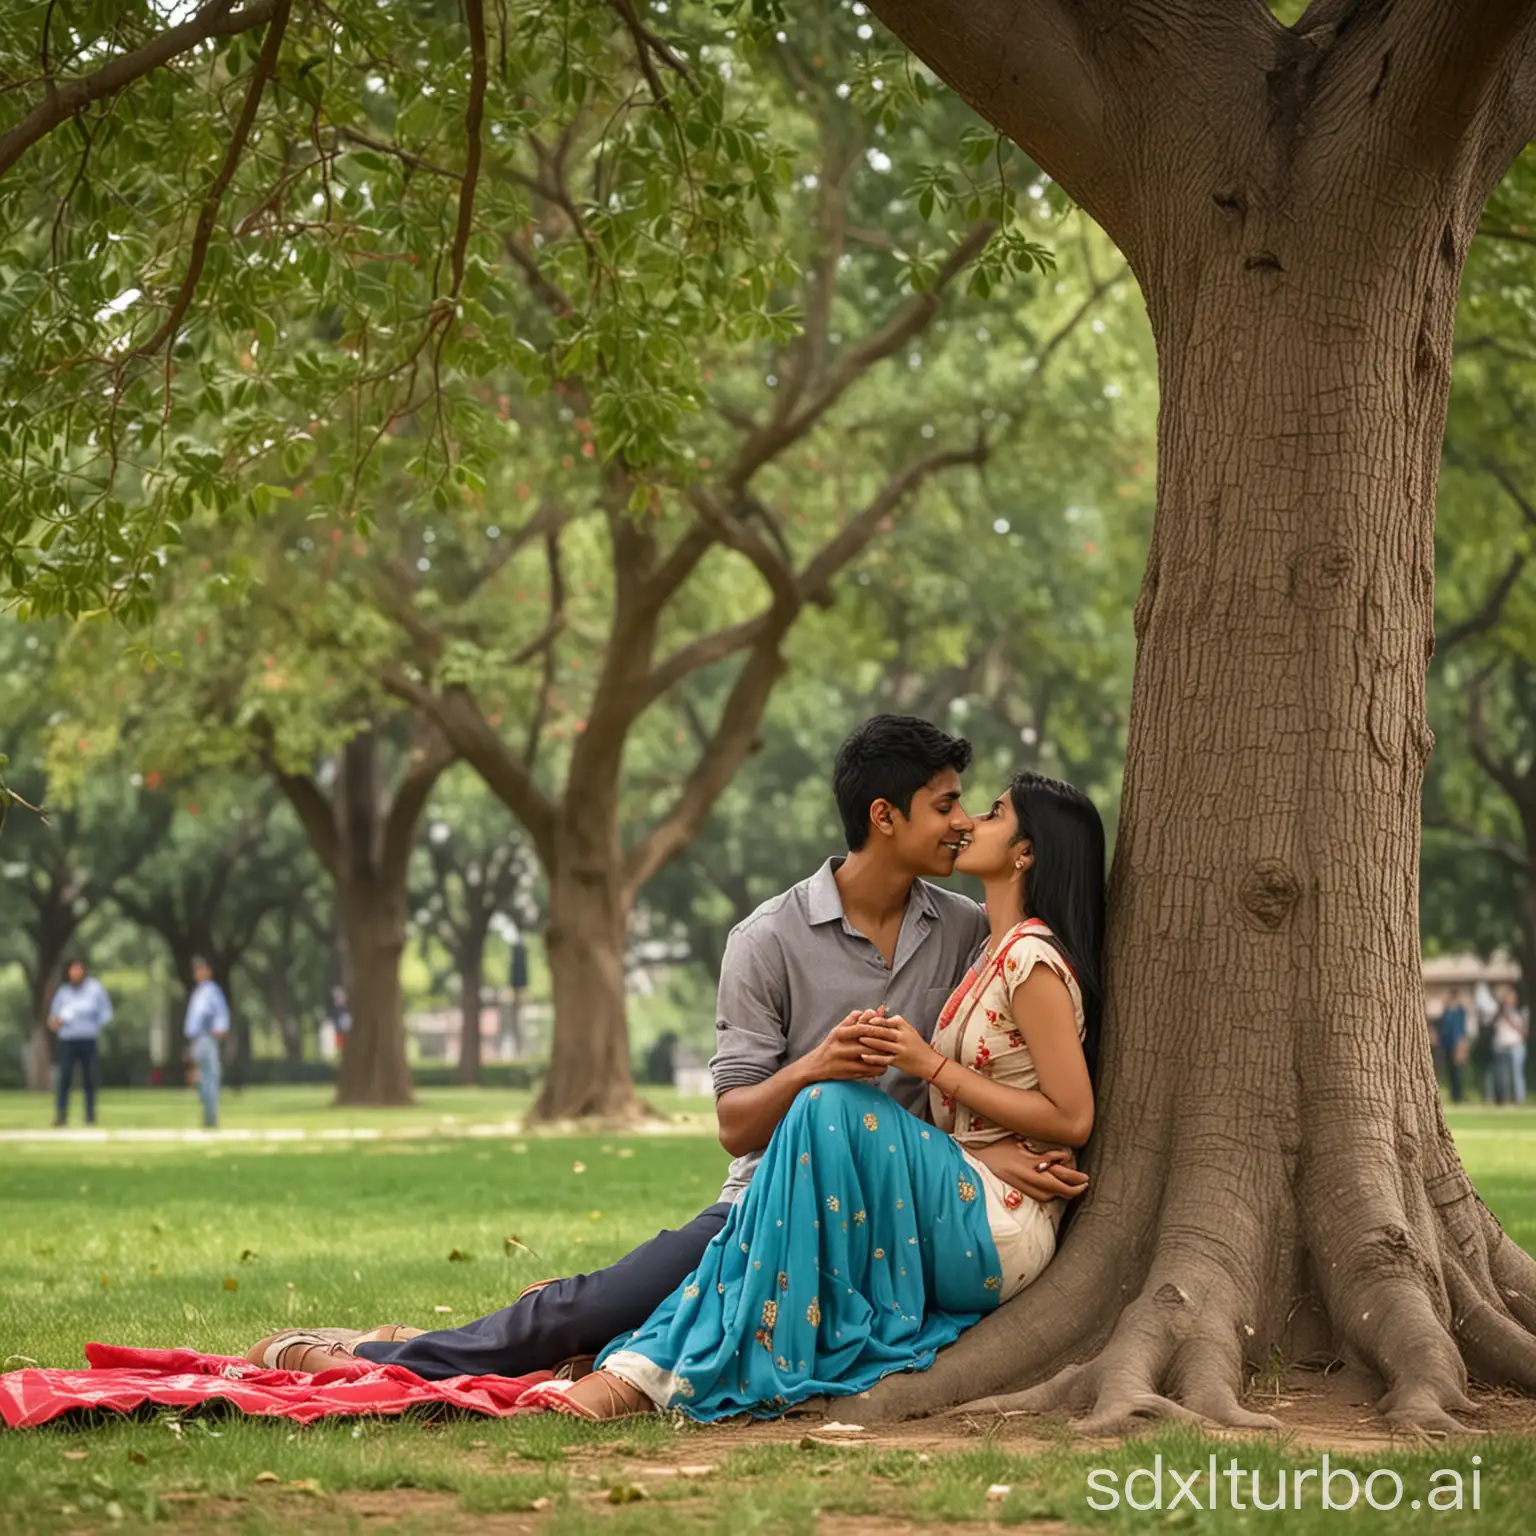 indian college boy and a girl, romantic closely
 under a tree, in a college campus